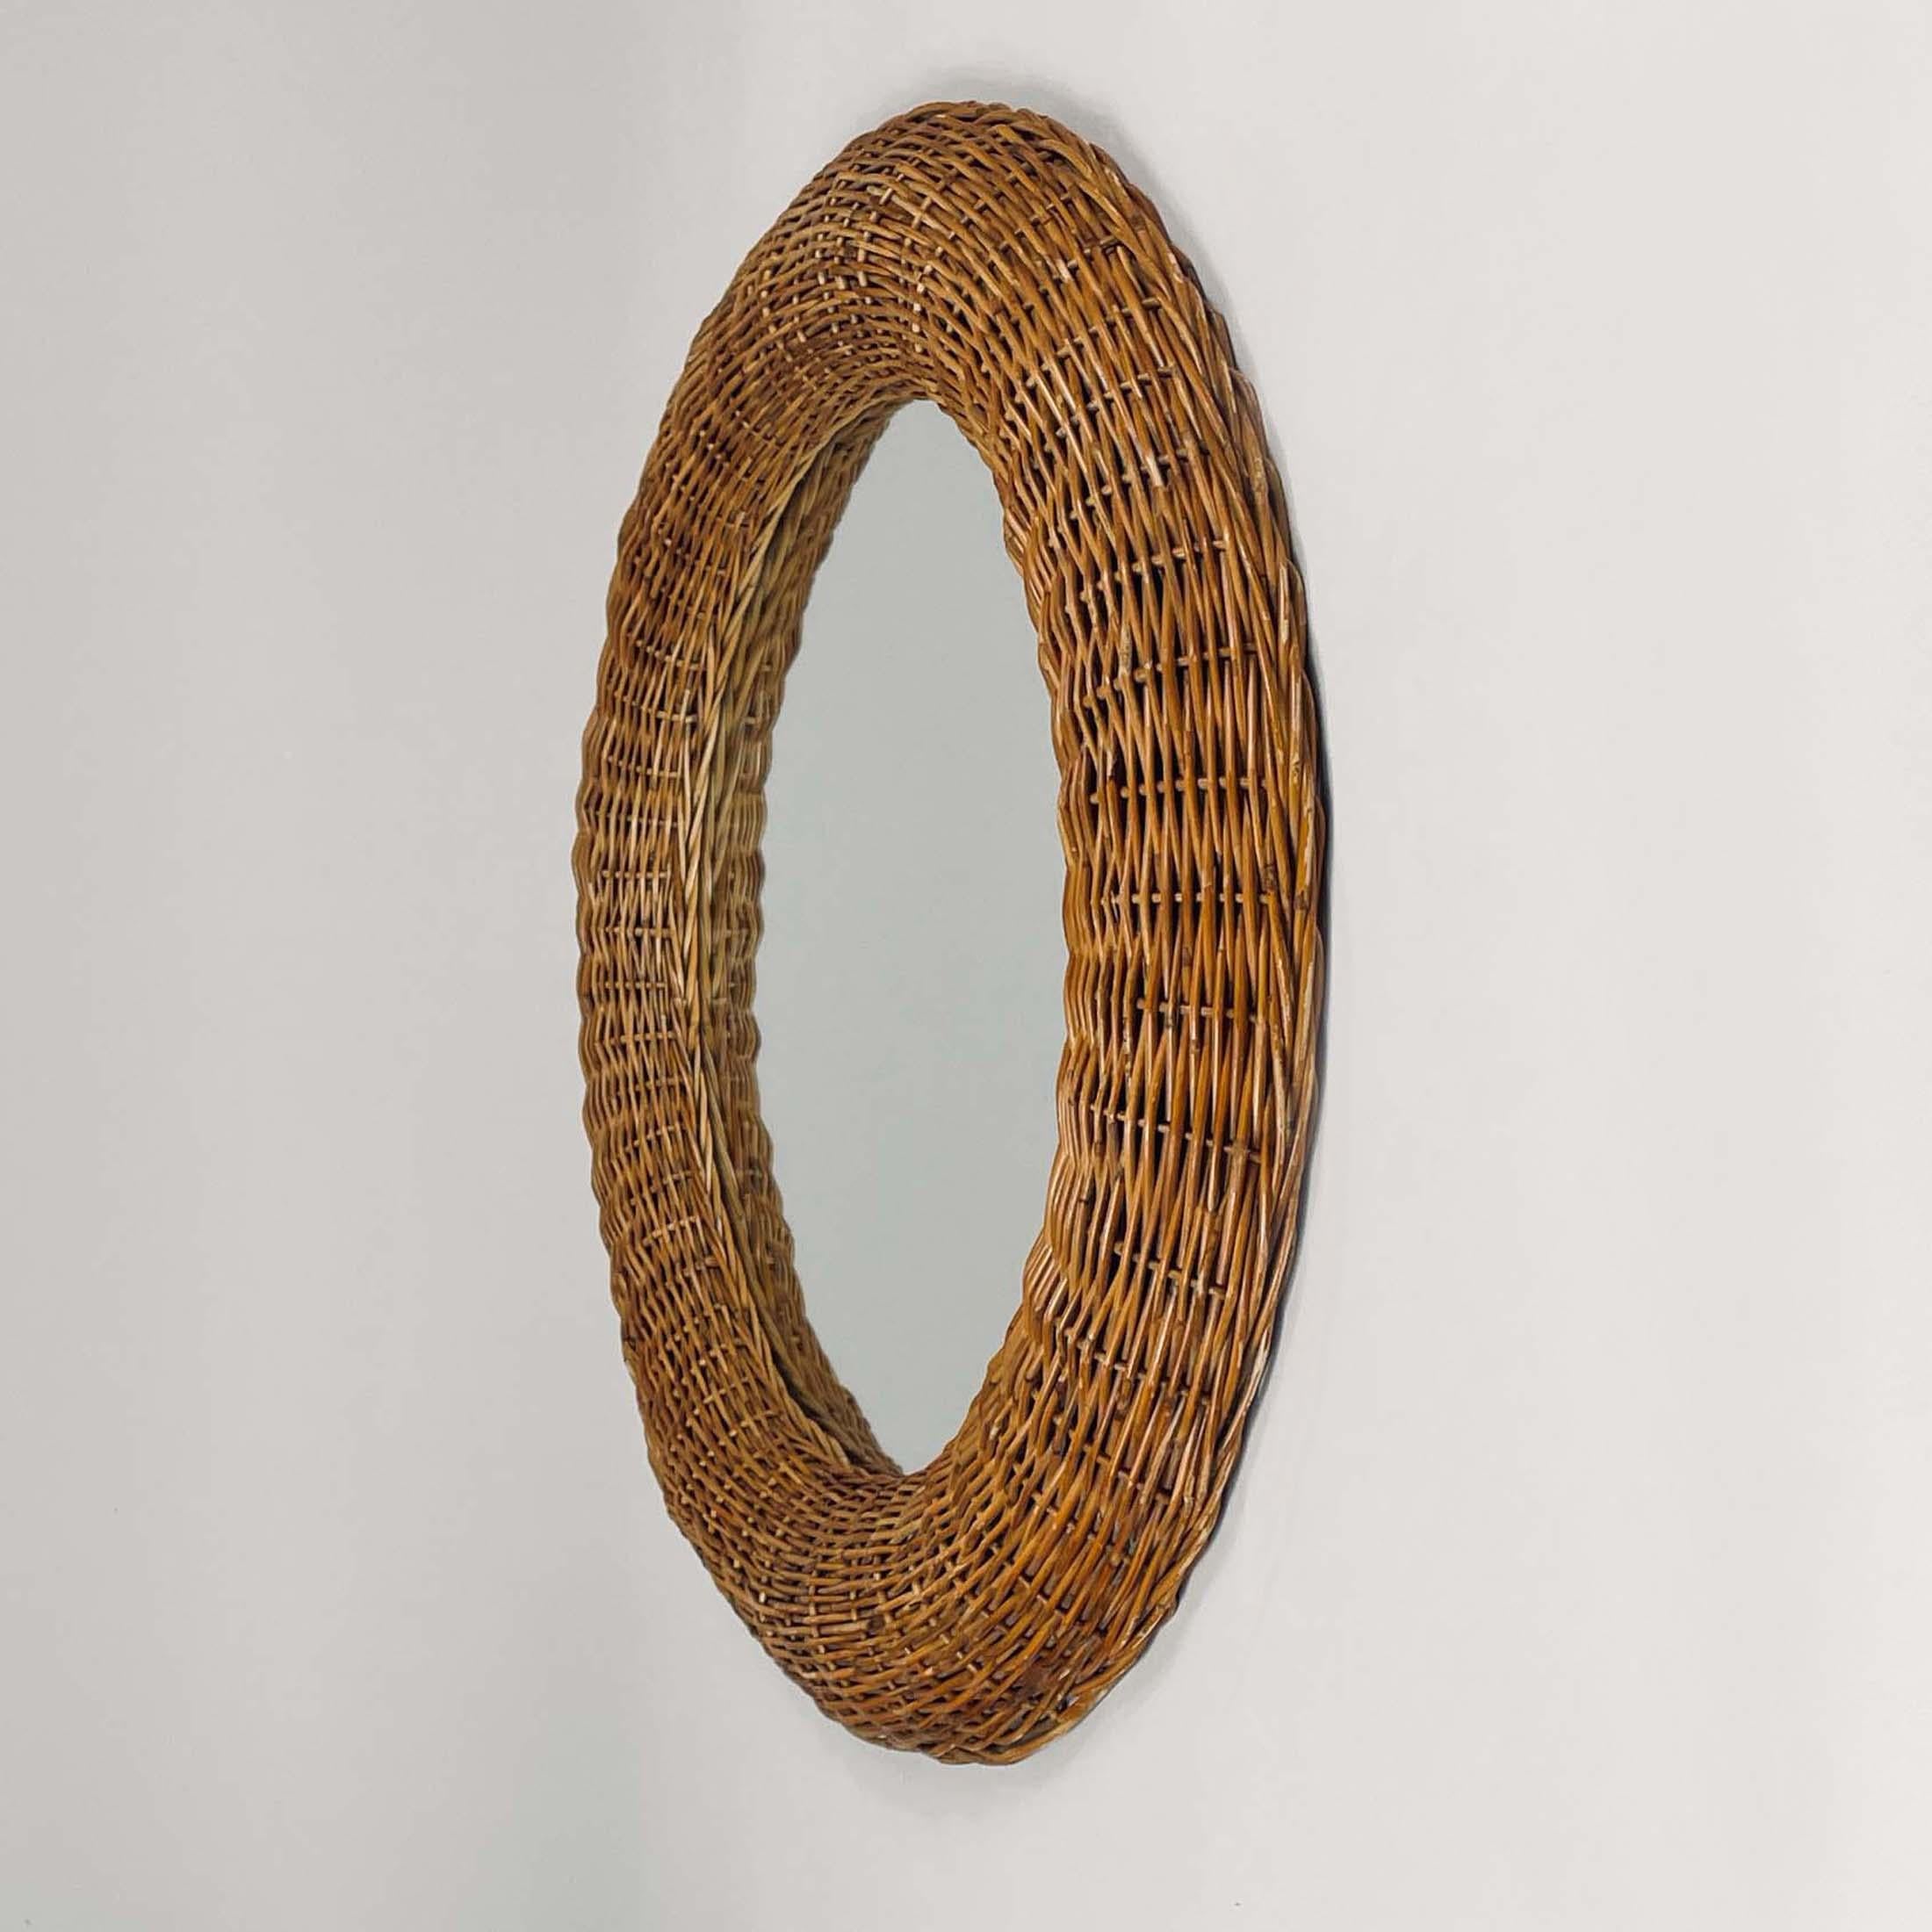 Riviera Style Round Woven Rattan Mirror, France 1950s For Sale 2